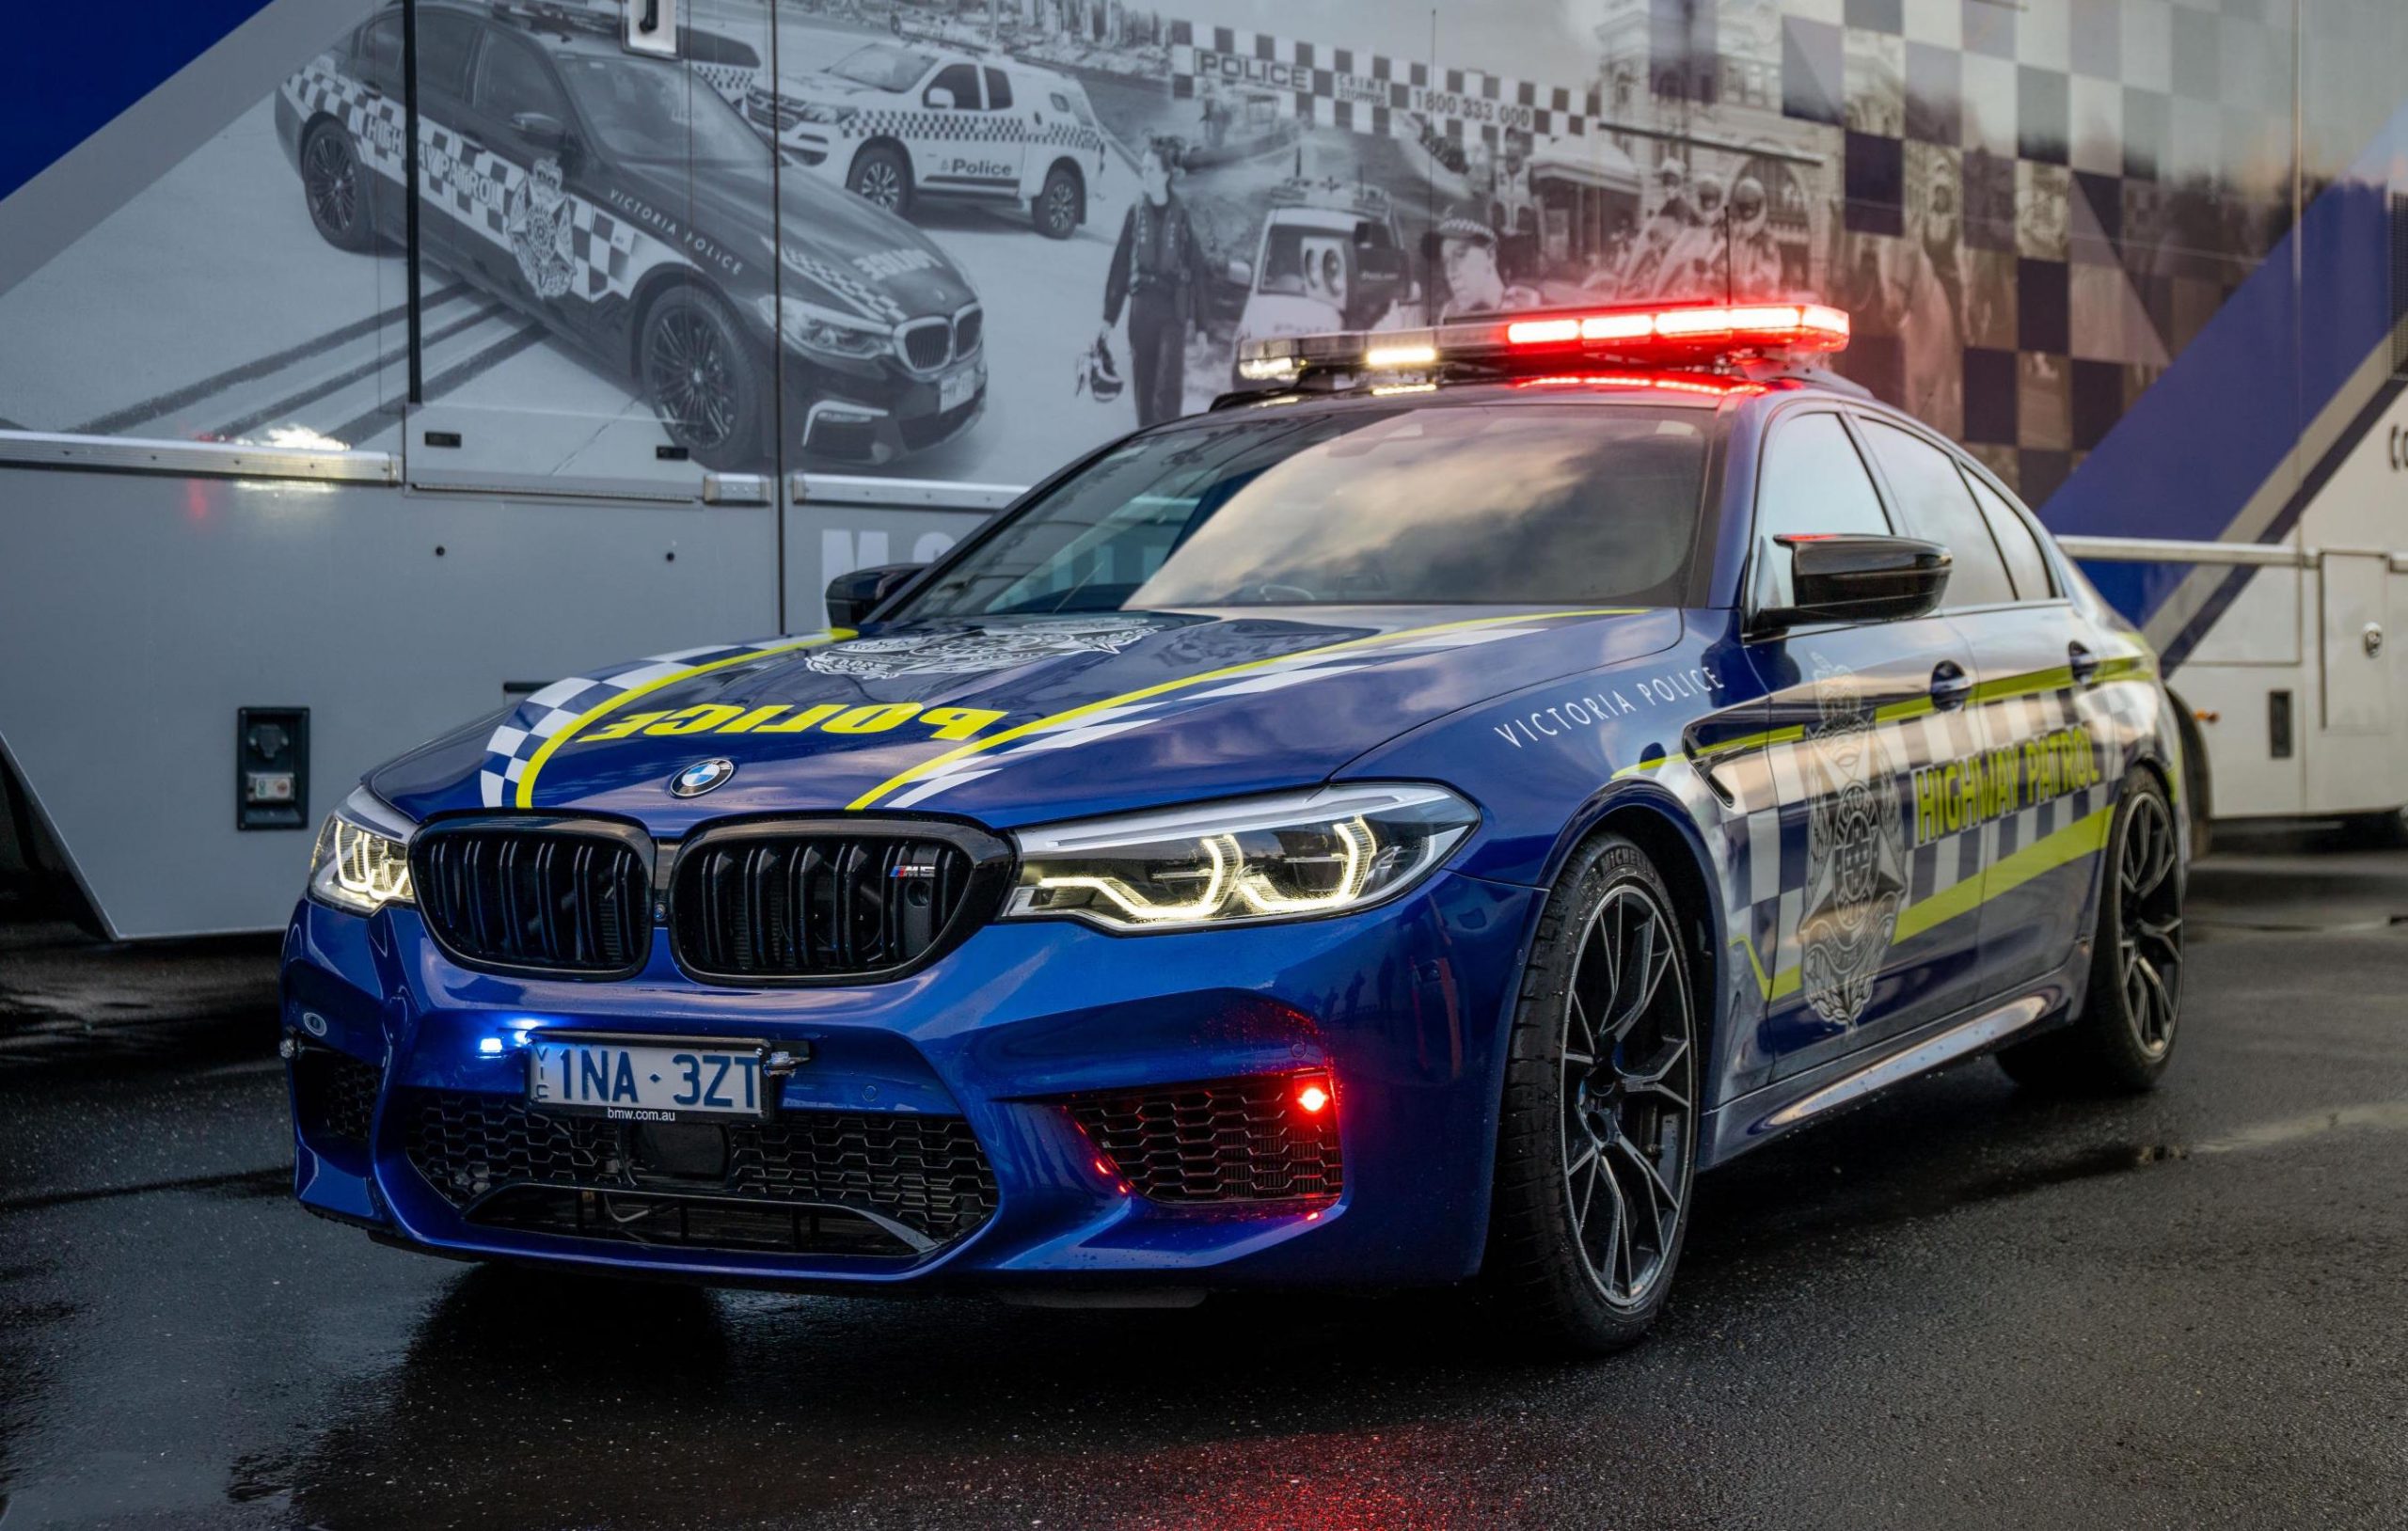 BMW M5 Competition highway patrol car joins Victoria Police